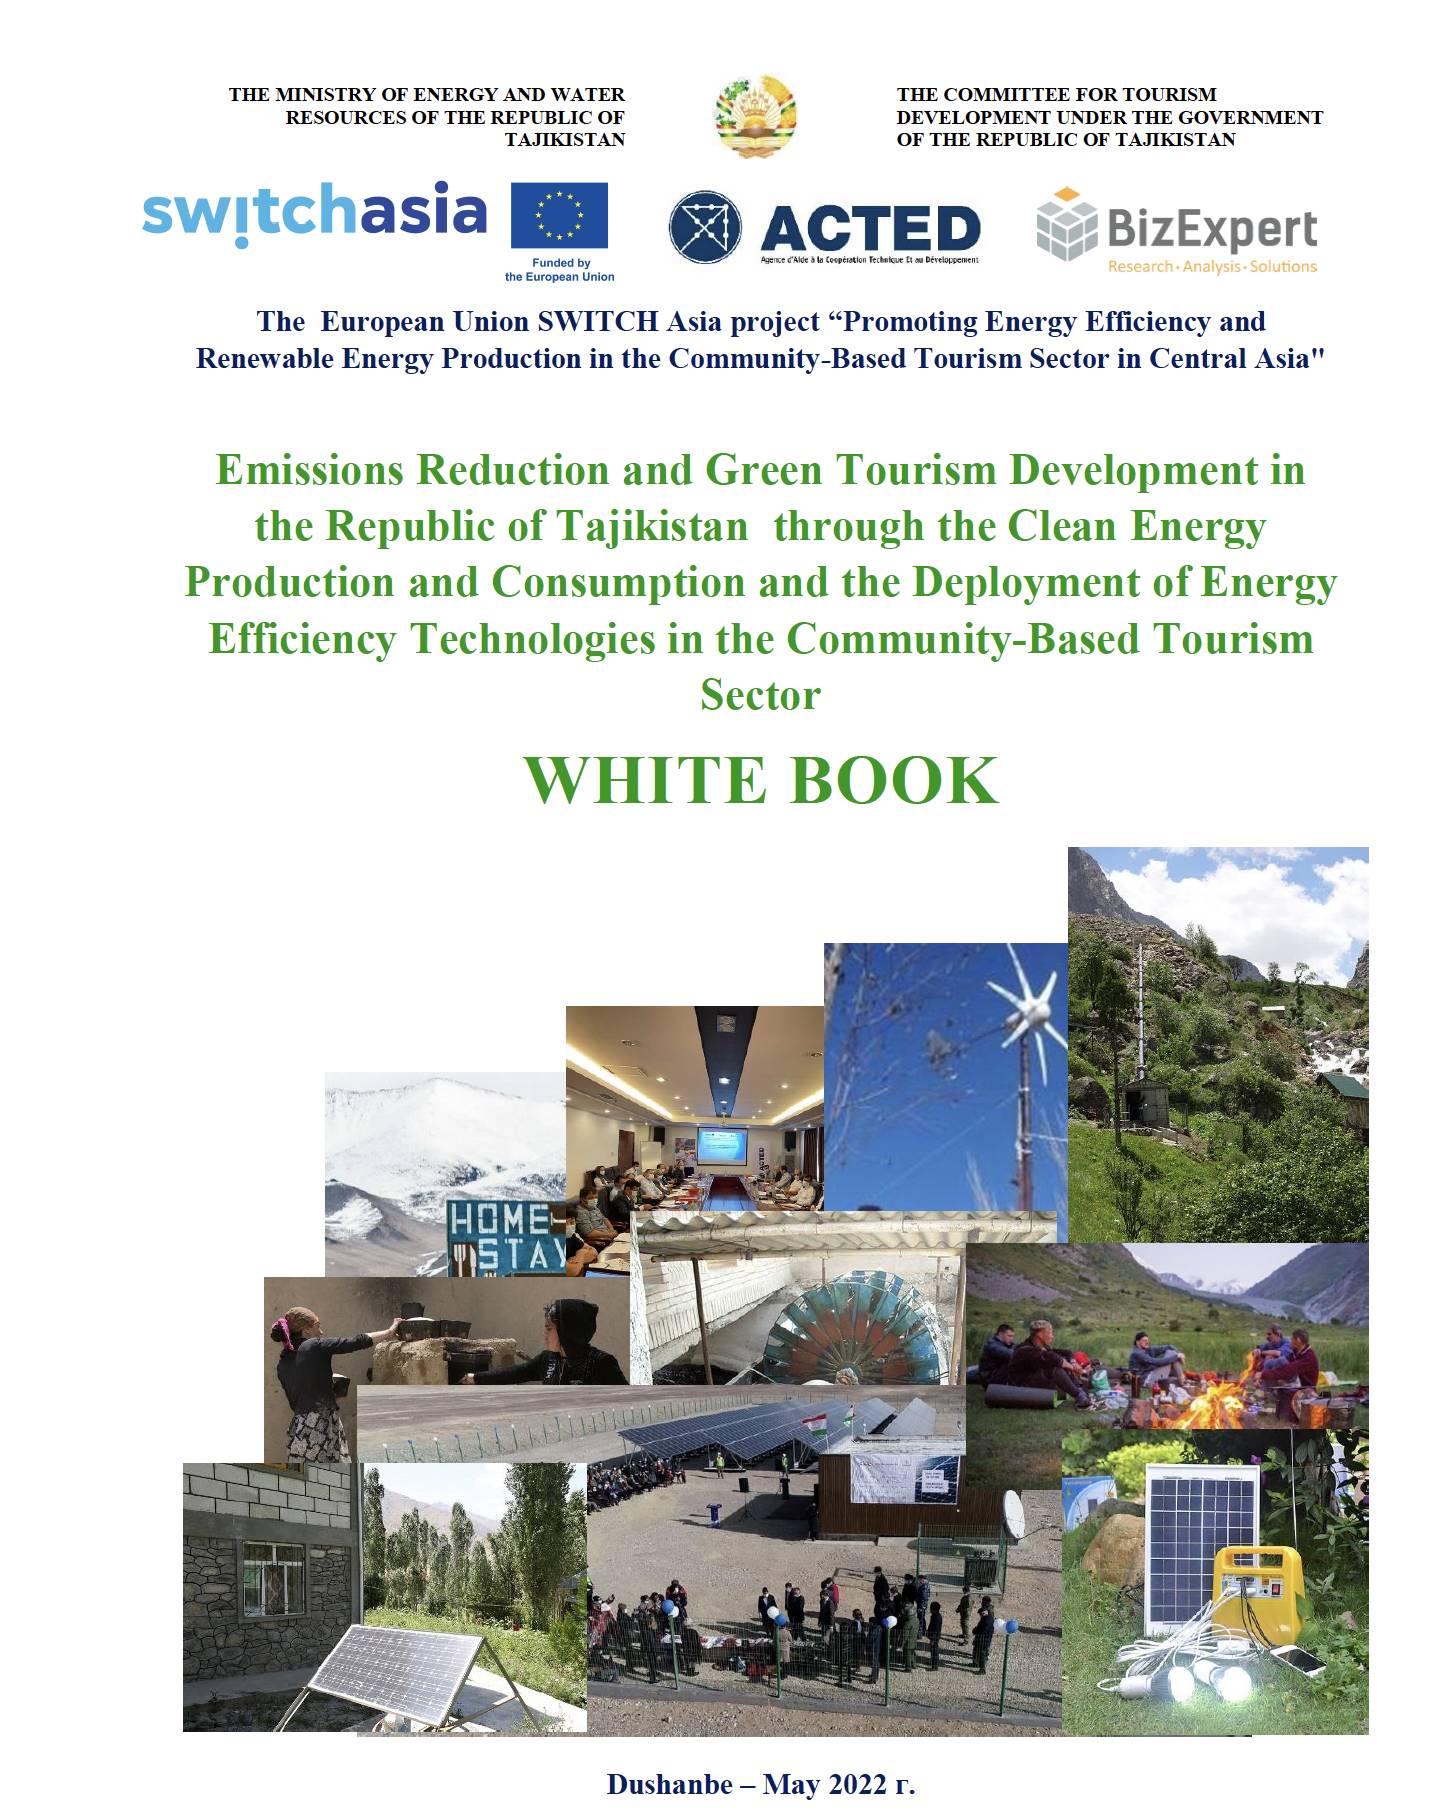 Emissions Reduction and Green Tourism Development in the Republic of Tajikistan